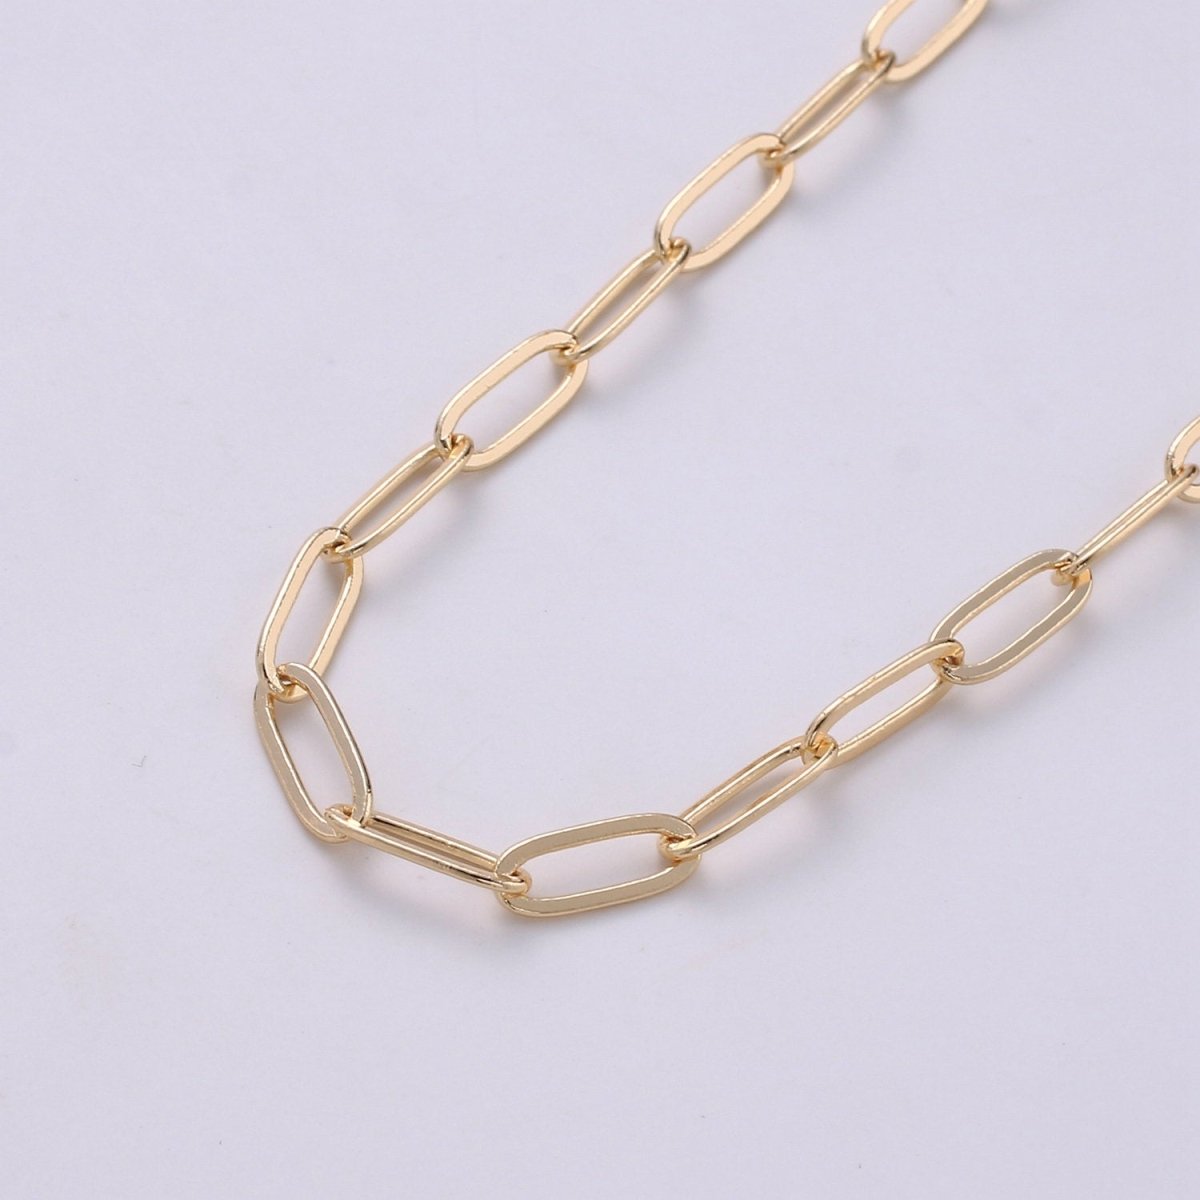 Oval Paperclip Chain Necklace 18K Gold Filled 4x10mm, Nickel Free Unfinished Link Chain | ROLL-312 ROLL-410 - DLUXCA